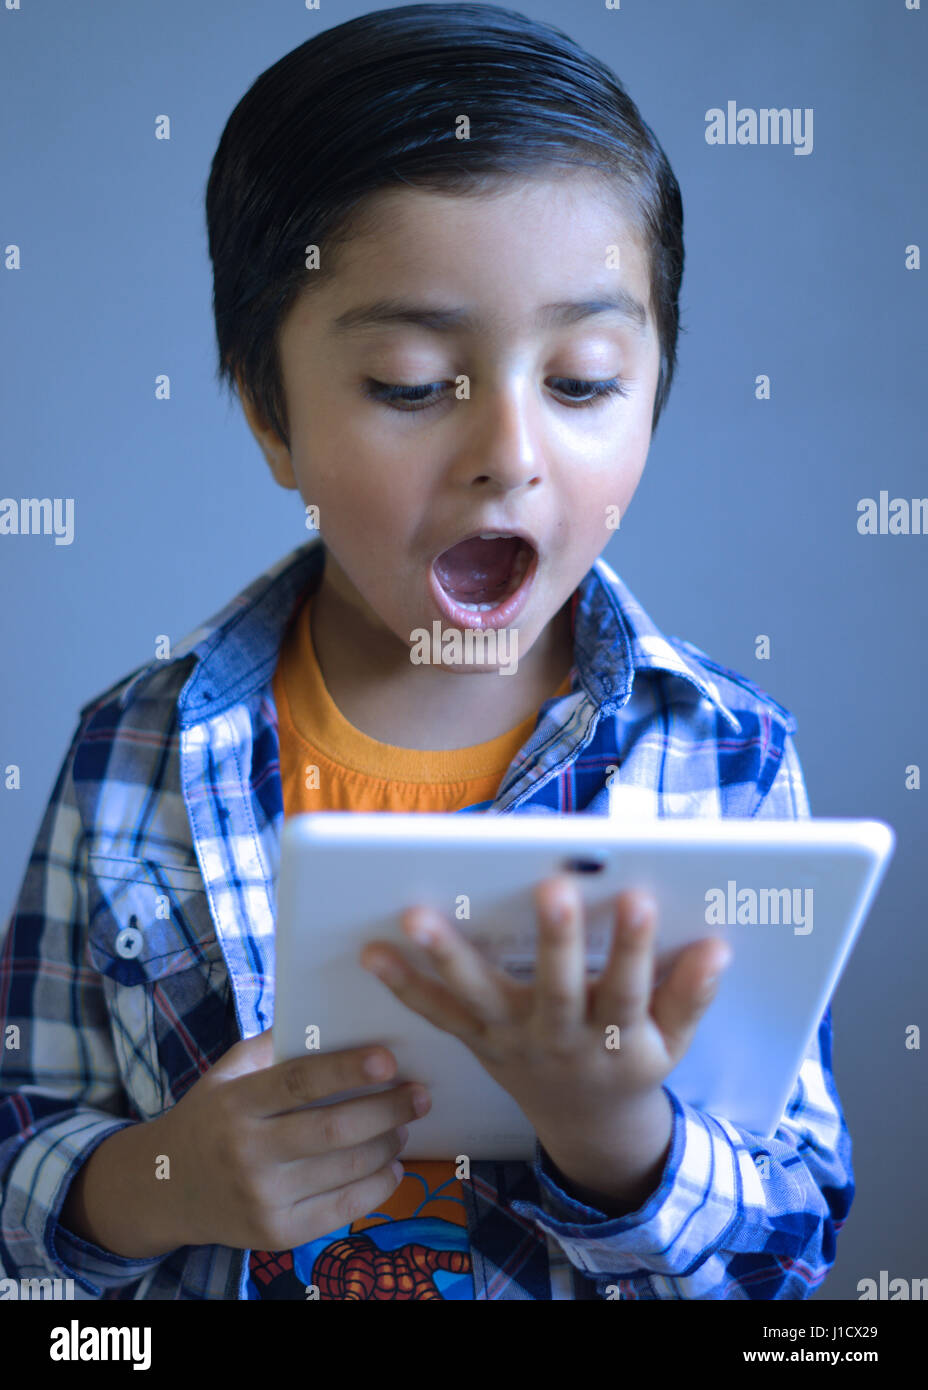 Kid with surprised look holding a tablet computer Stock Photo